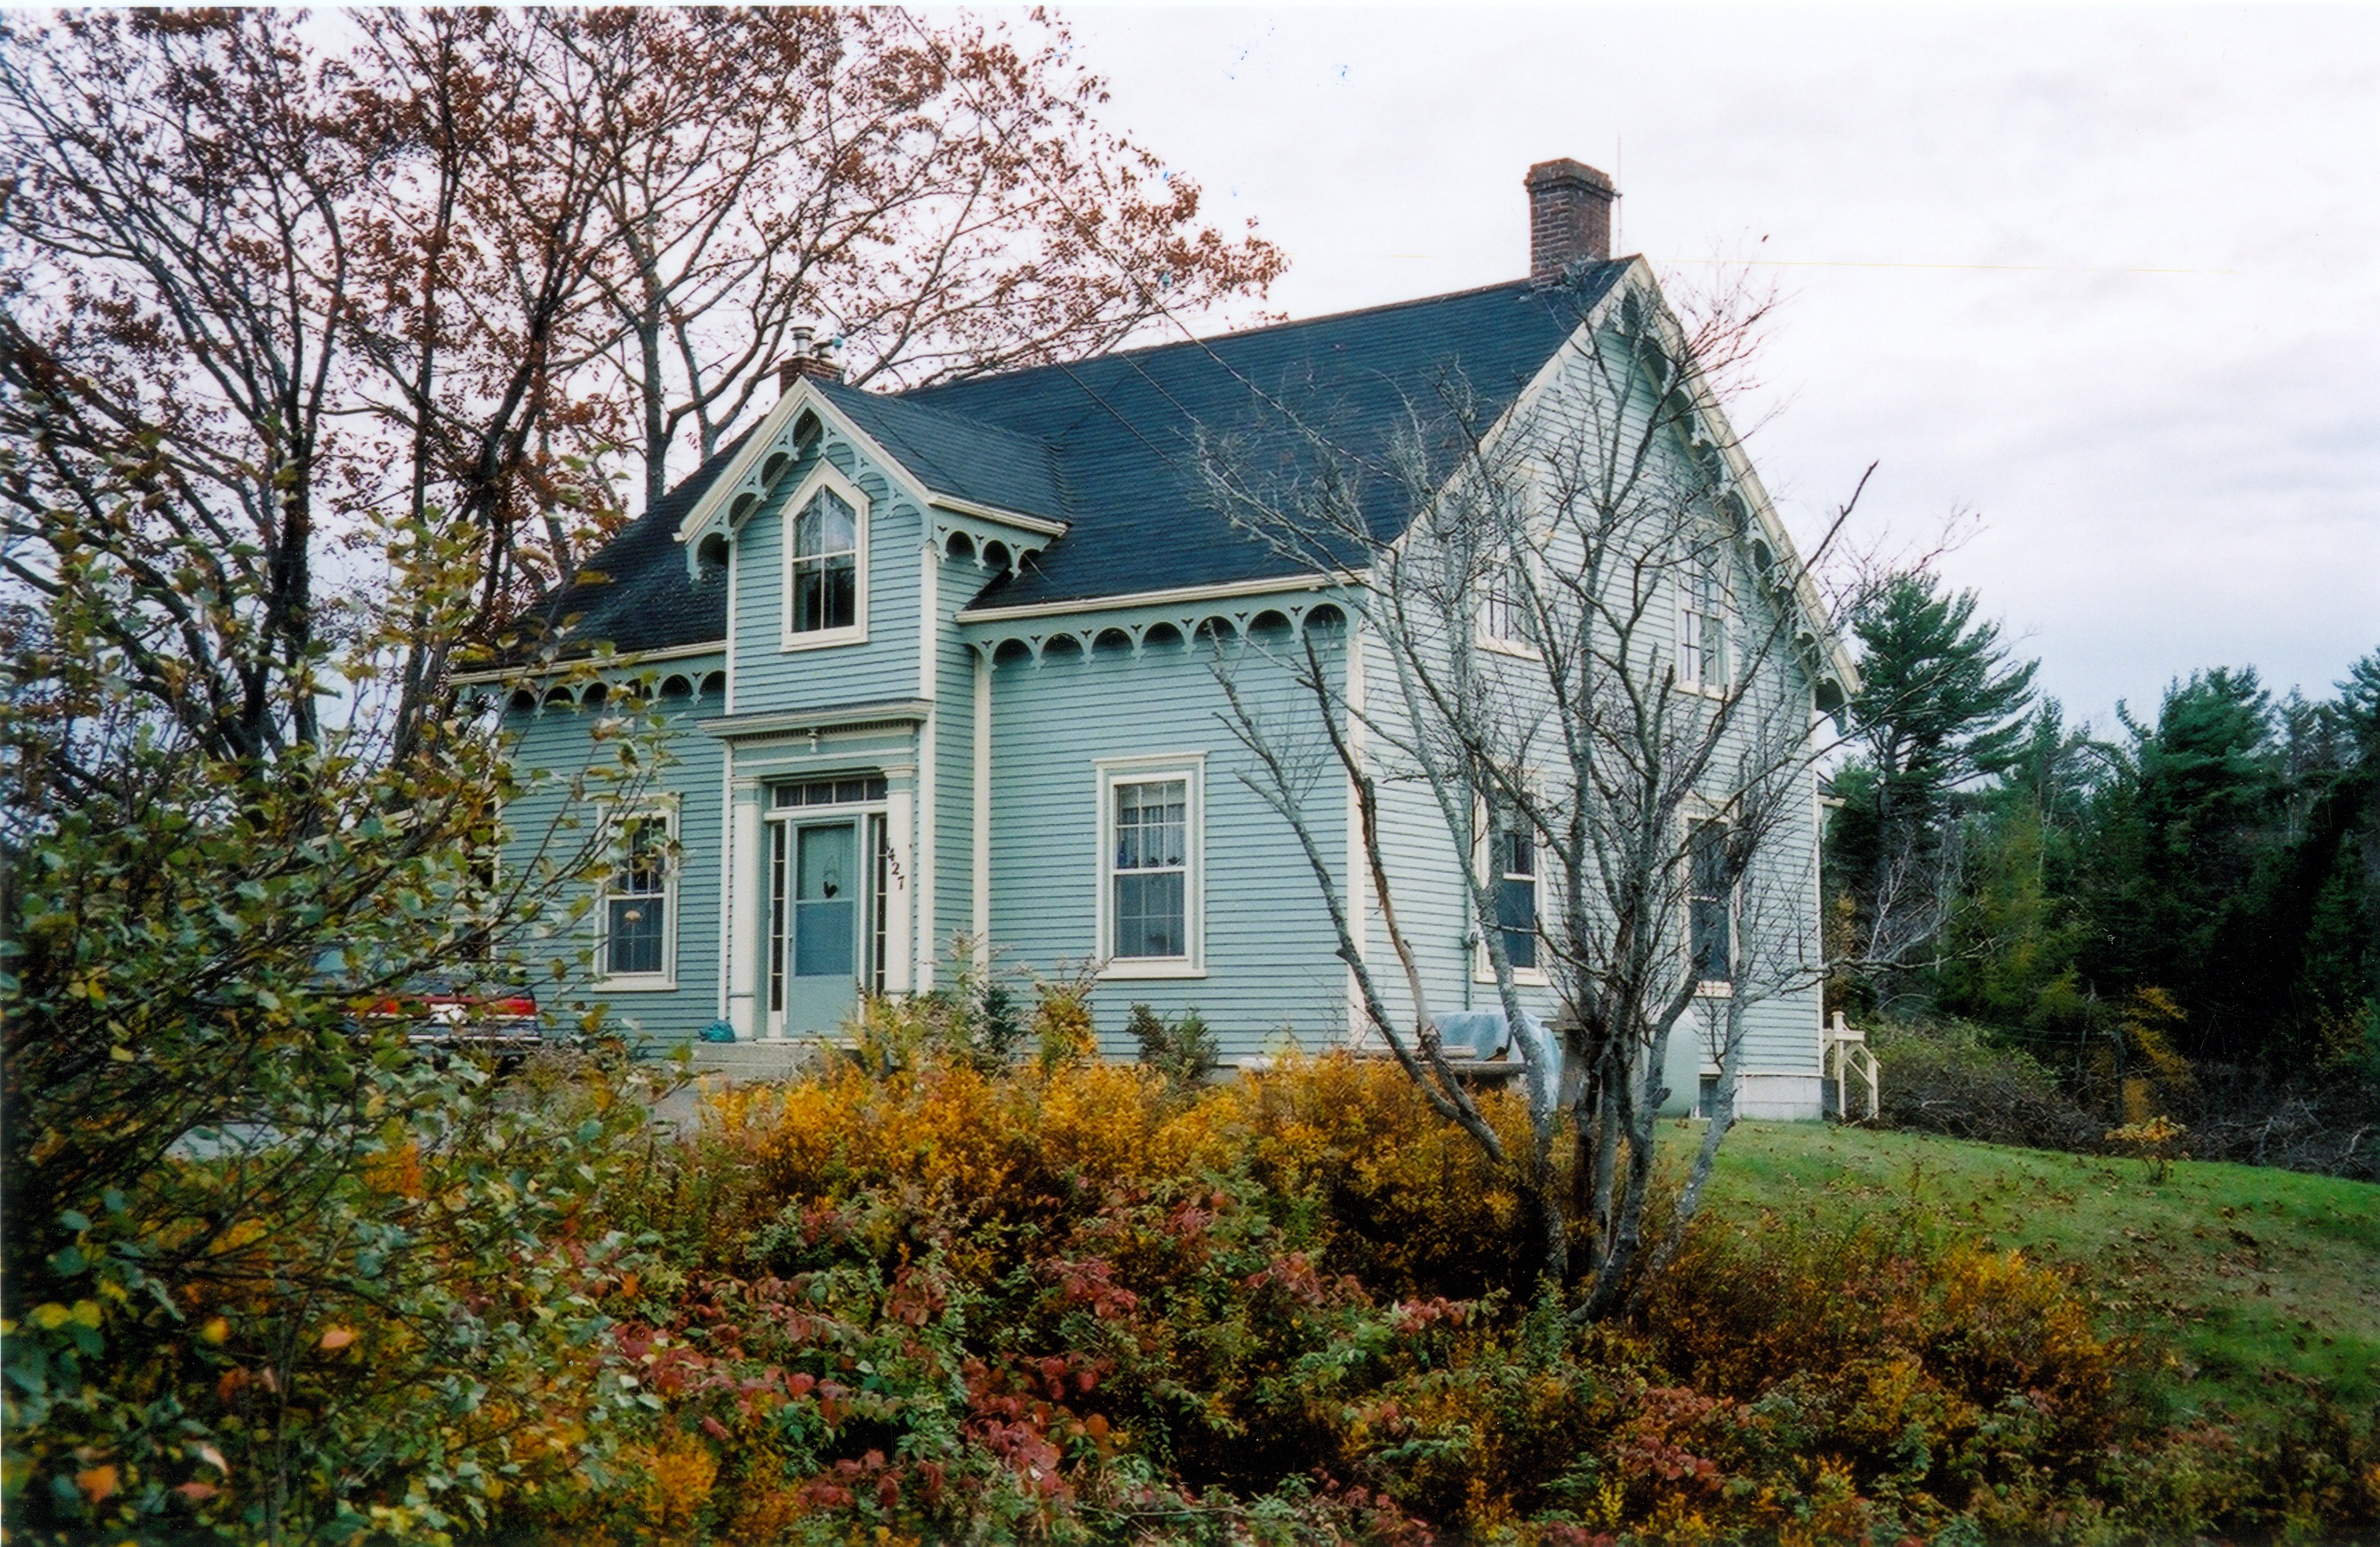 Moxin House on Cobequid Road